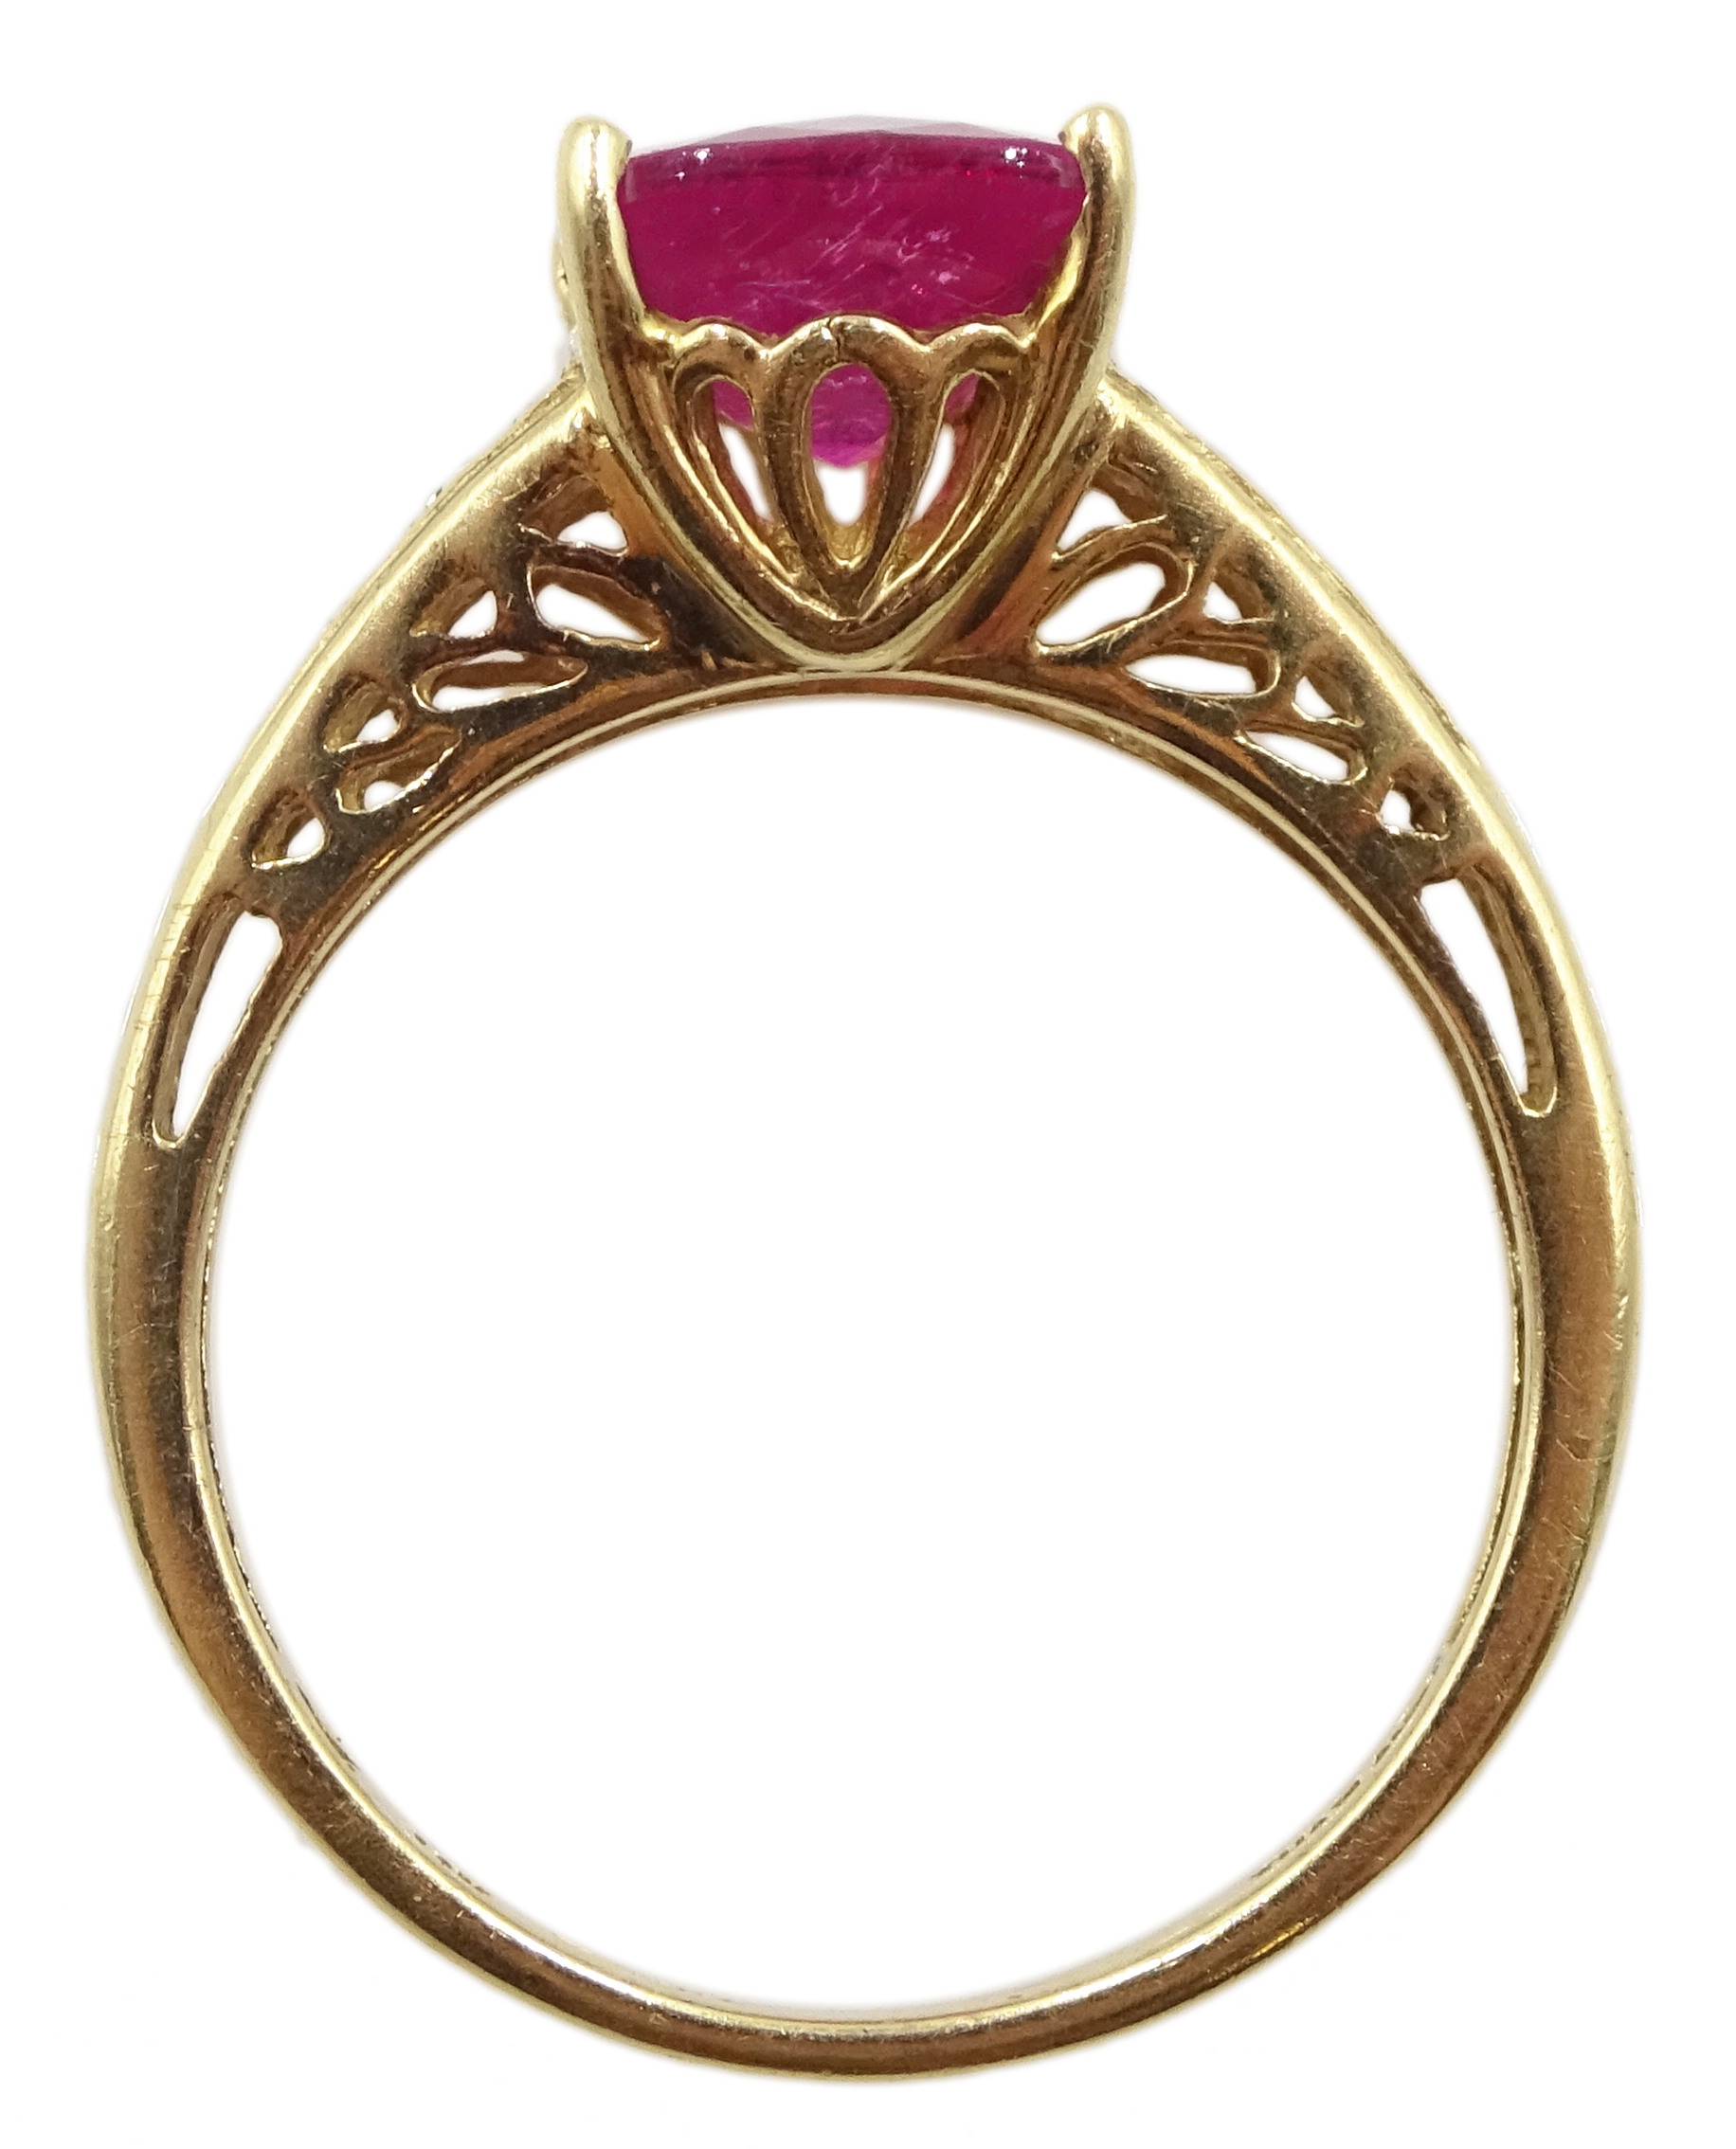 14ct gold briolette cut rubellite ring, with diamond set shoulders, hallmarked - Image 3 of 3